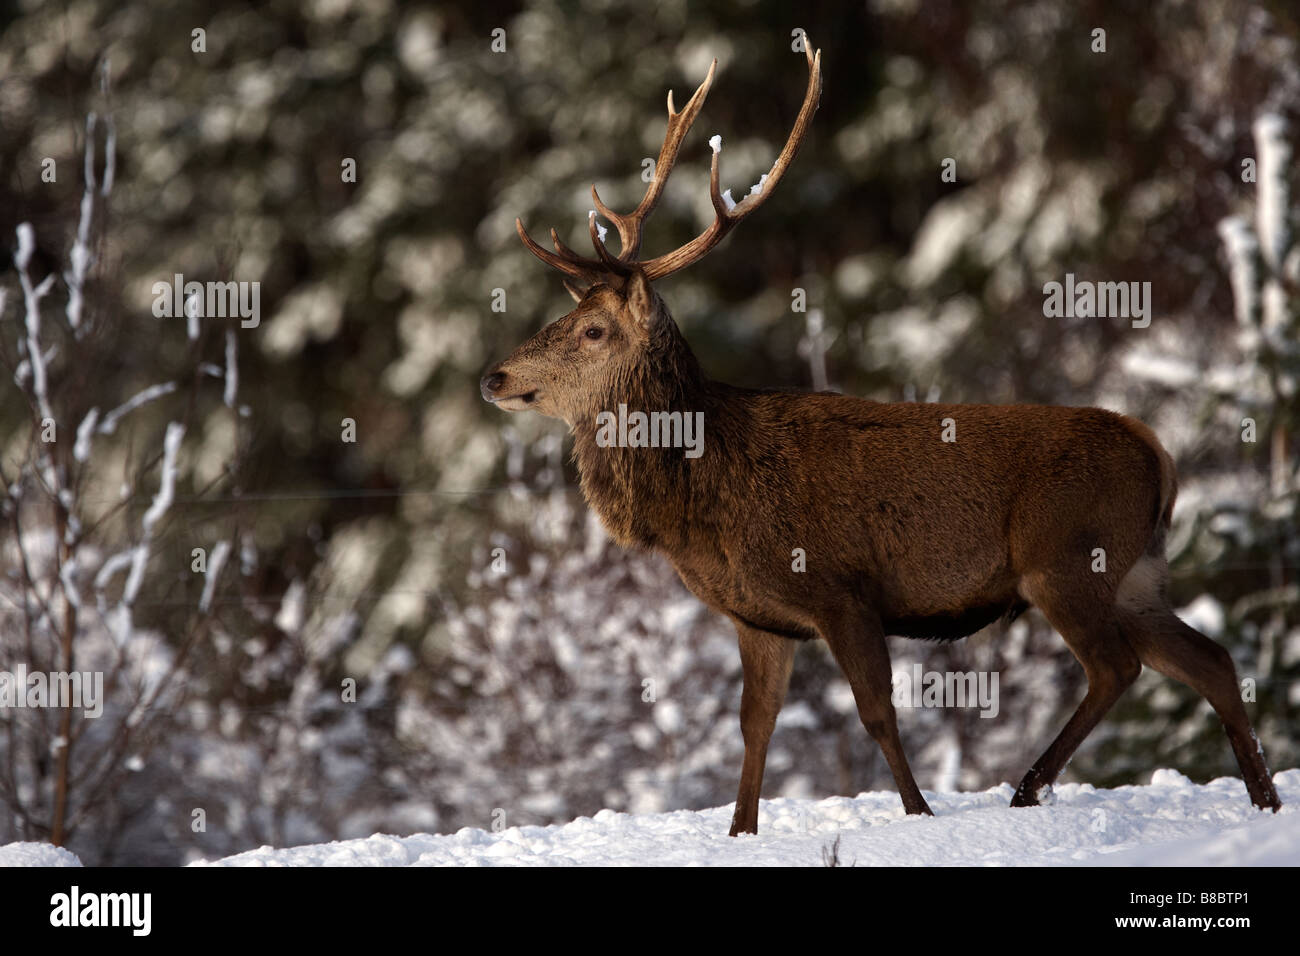 A red stag deer in a snow scene Stock Photo